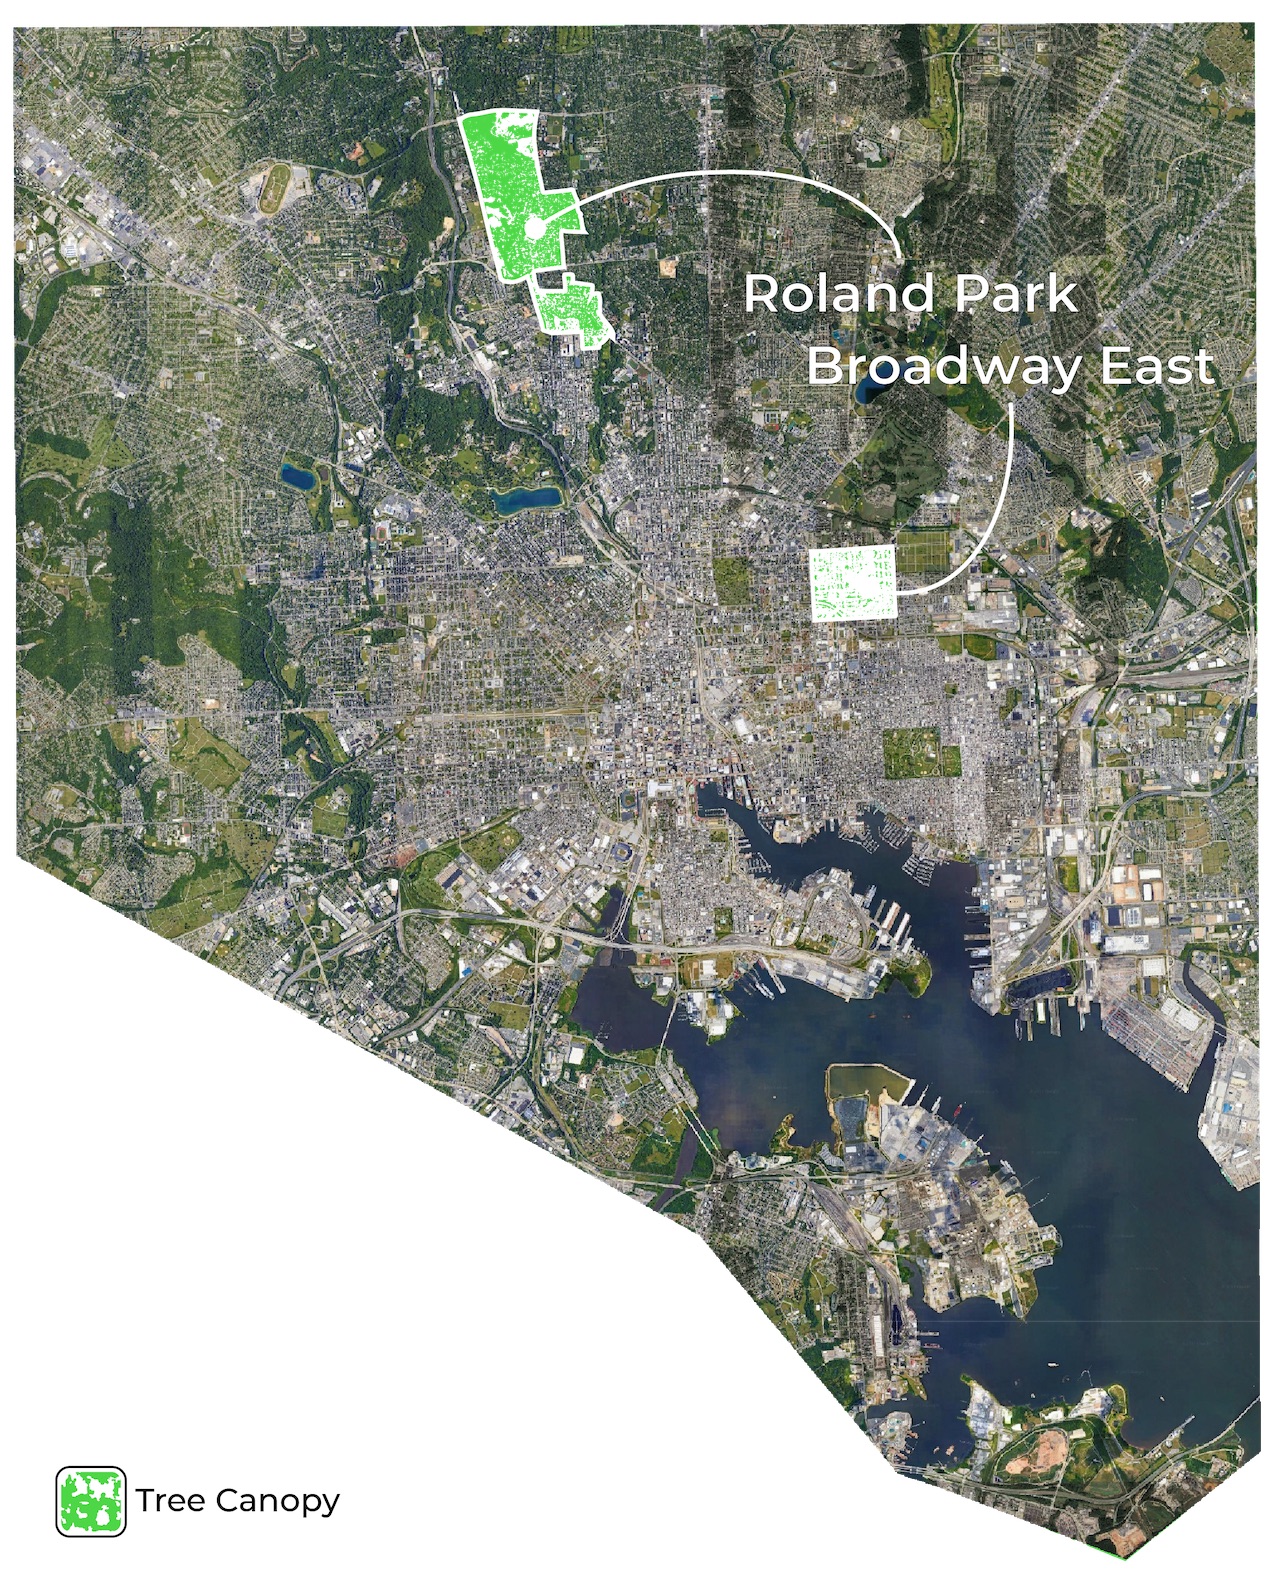 The map again shows all of Baltimore, now with both Roland Park and Broadway East labeled and showing a stark difference in the green blotches that represent tree canopy.